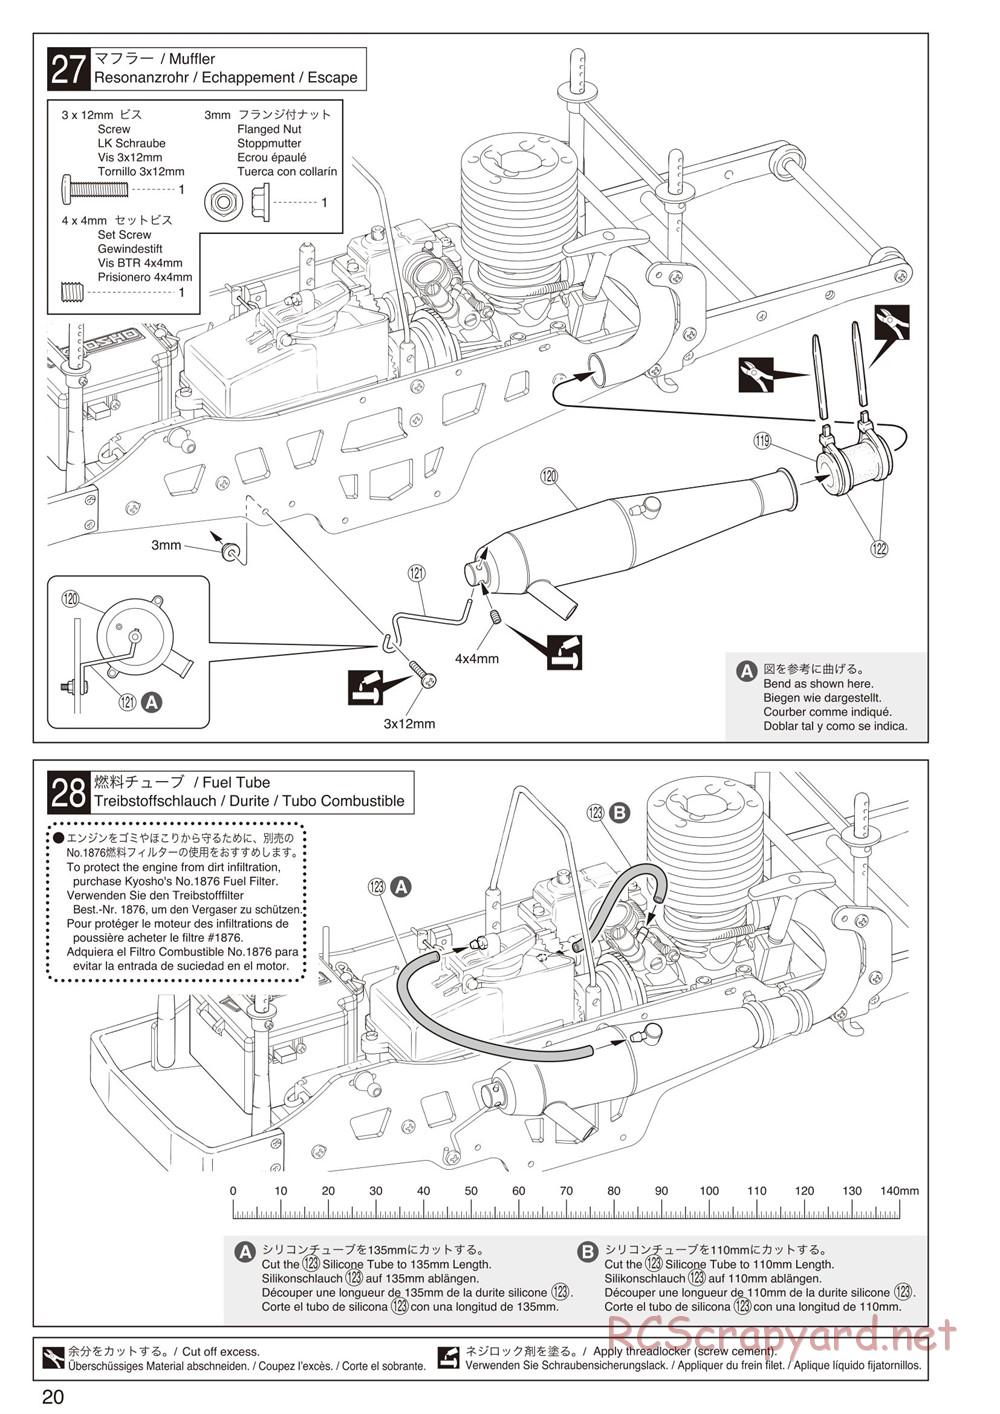 Kyosho - Mad Force Kruiser 2.0 - Manual - Page 20